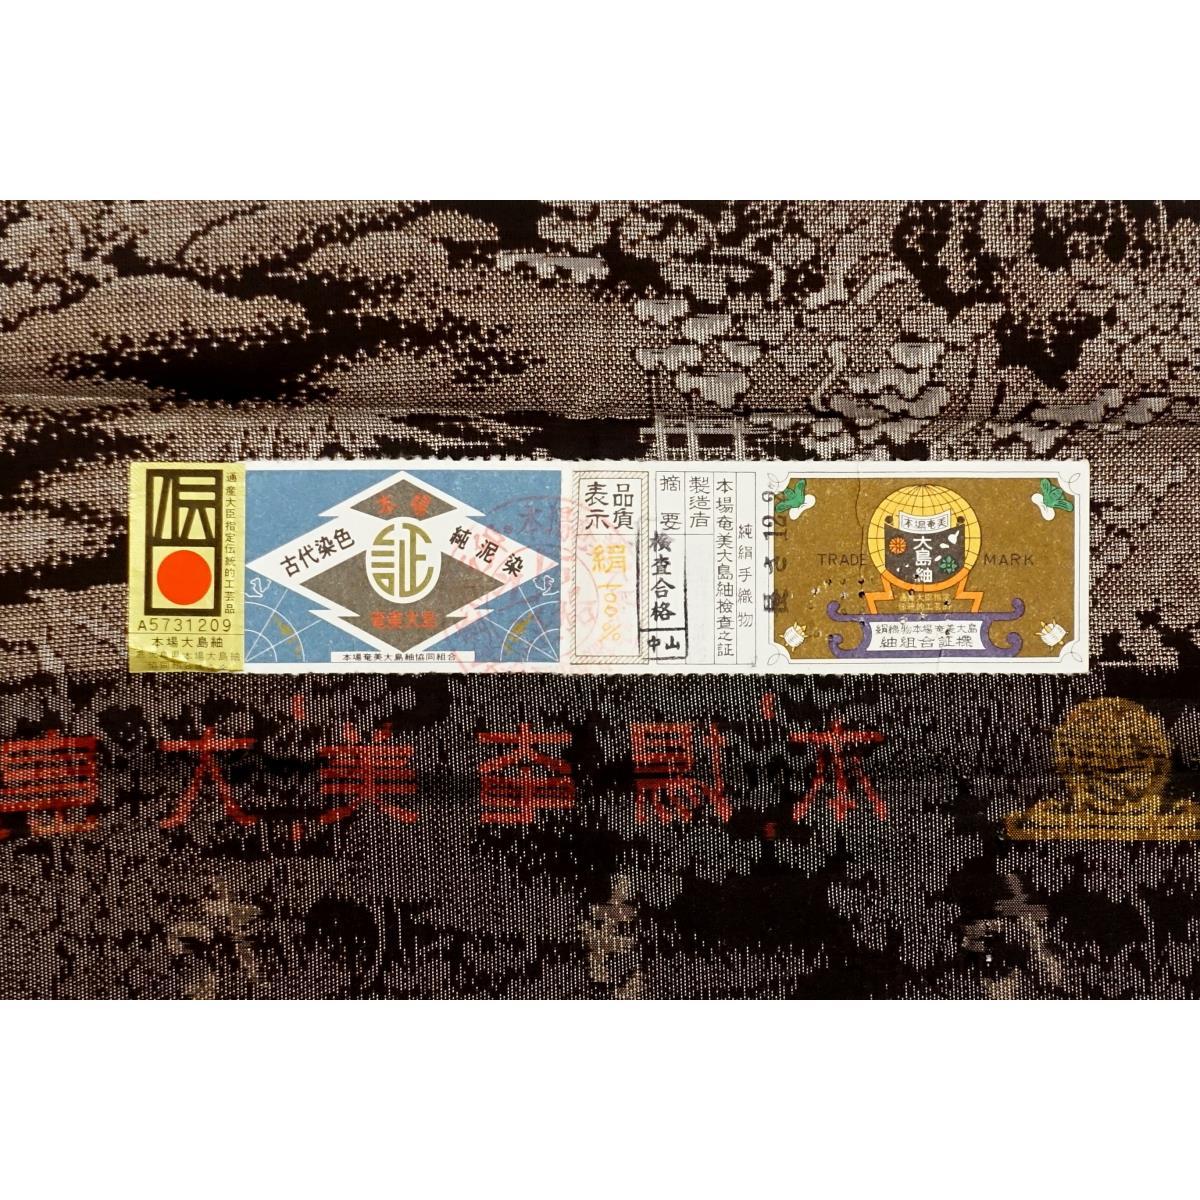 [Unused items] Authentic Amami Ooshima Tsumugi 9 Maruki with certificate stamp, length S